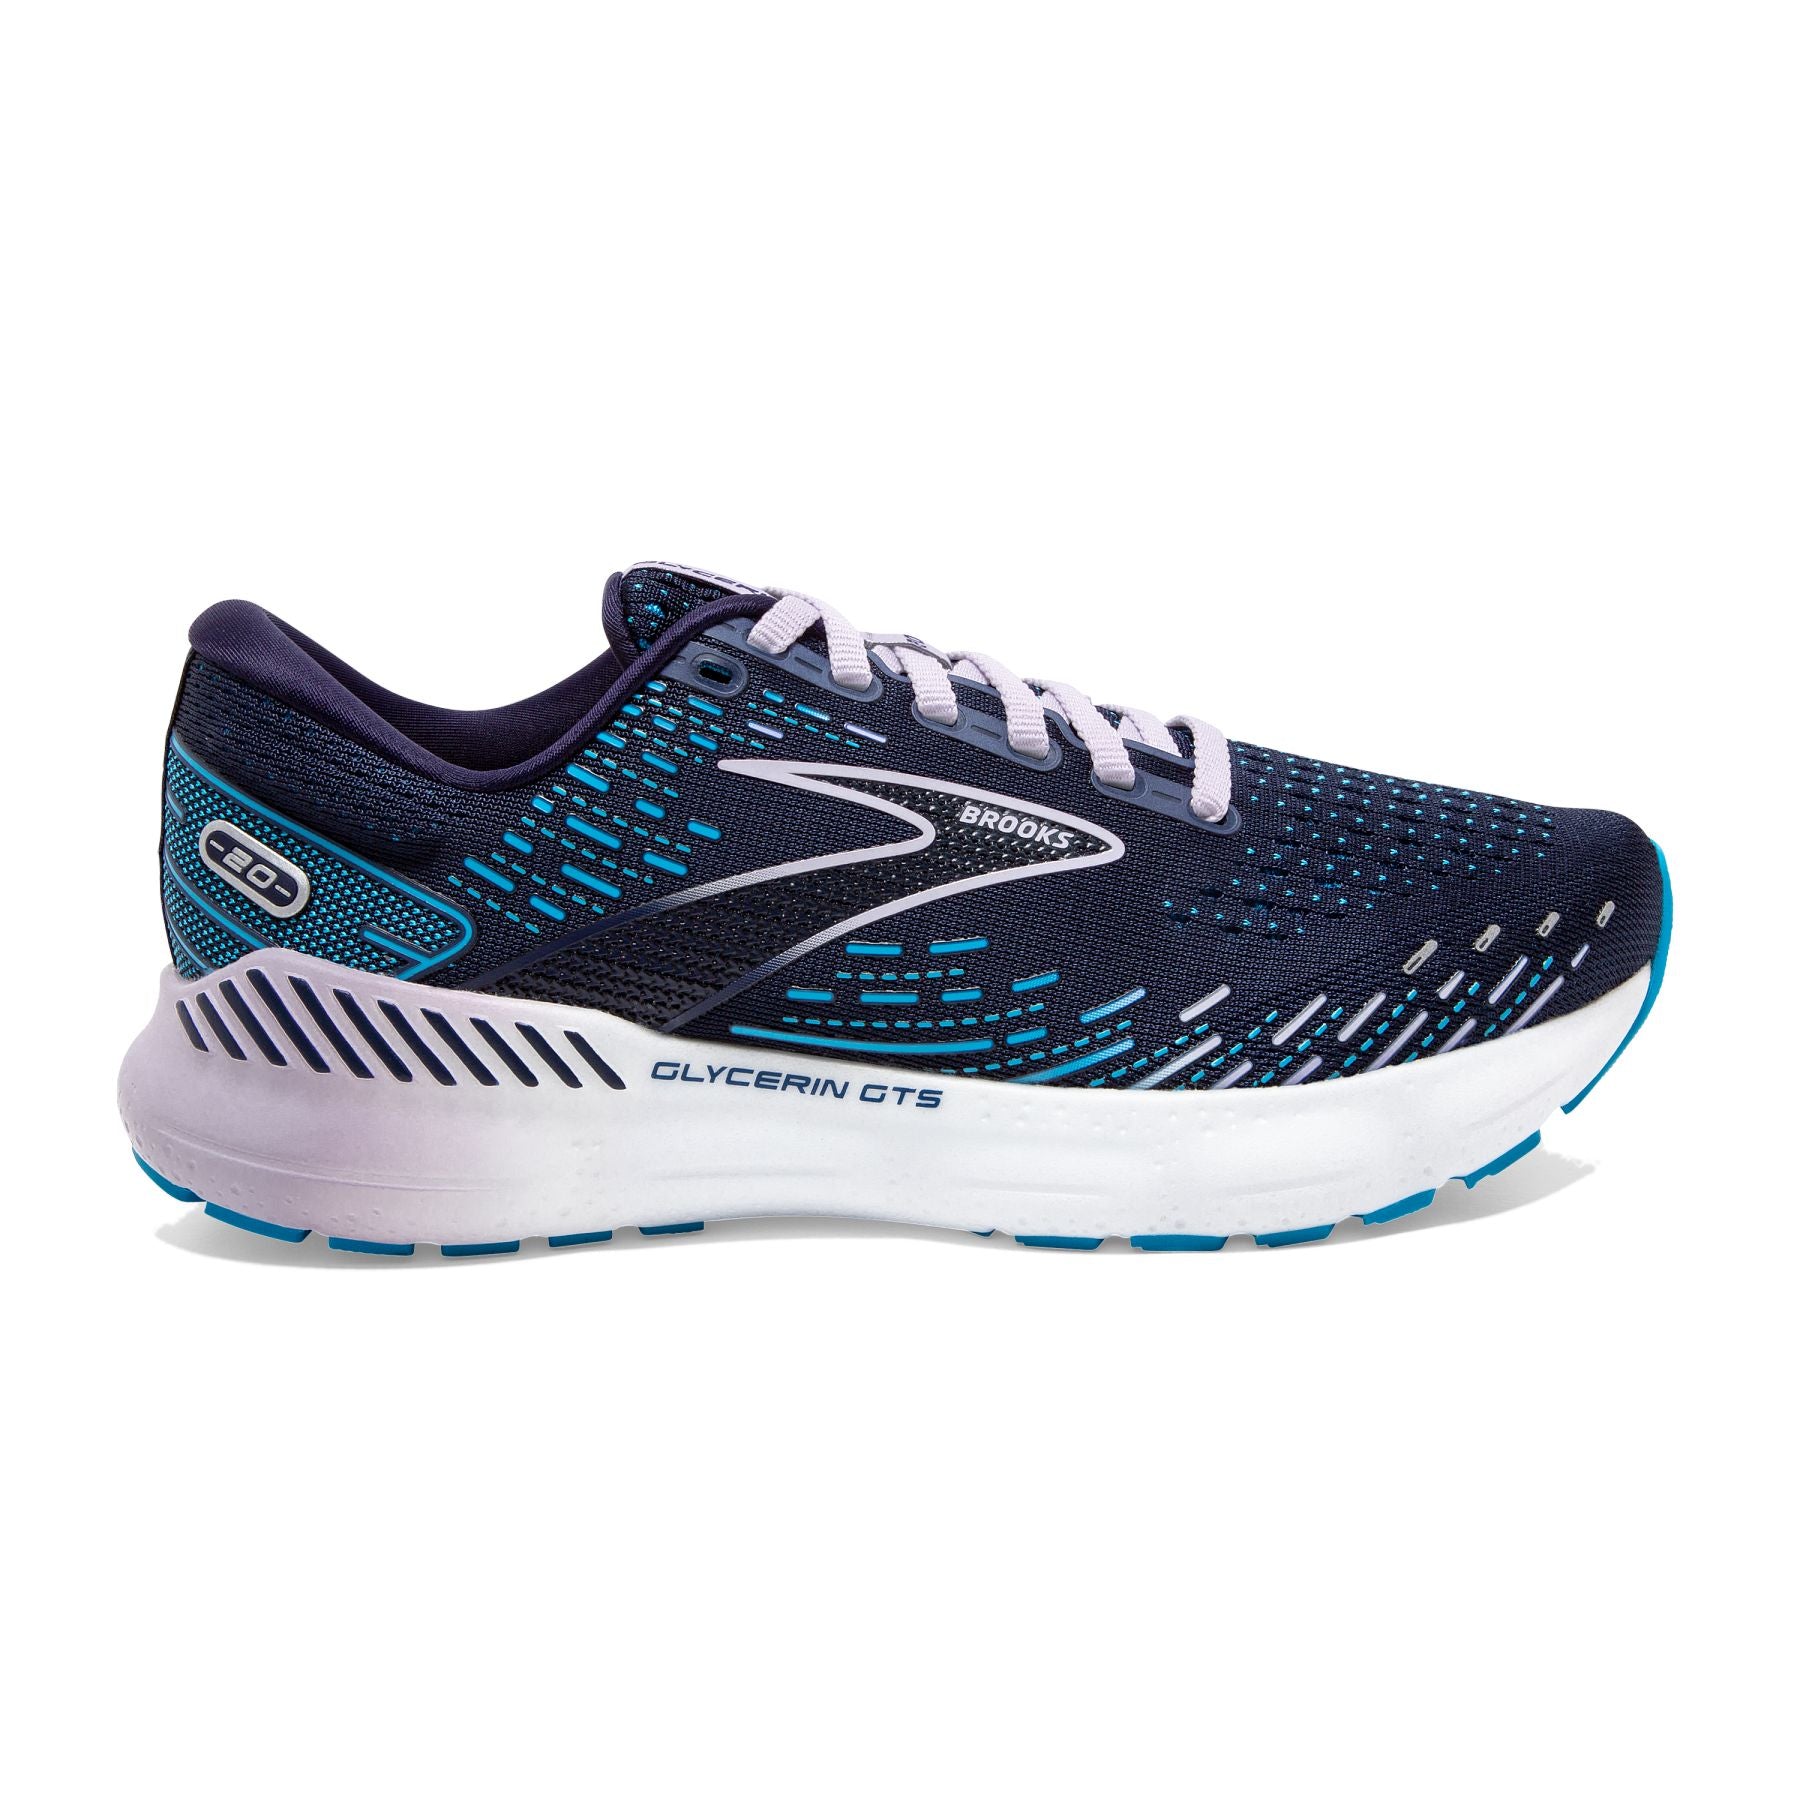 Lateral view of the Women's Glycerin GTS 20 by BROOKS in the color Peacoat/Ocean/Pastel Lilac